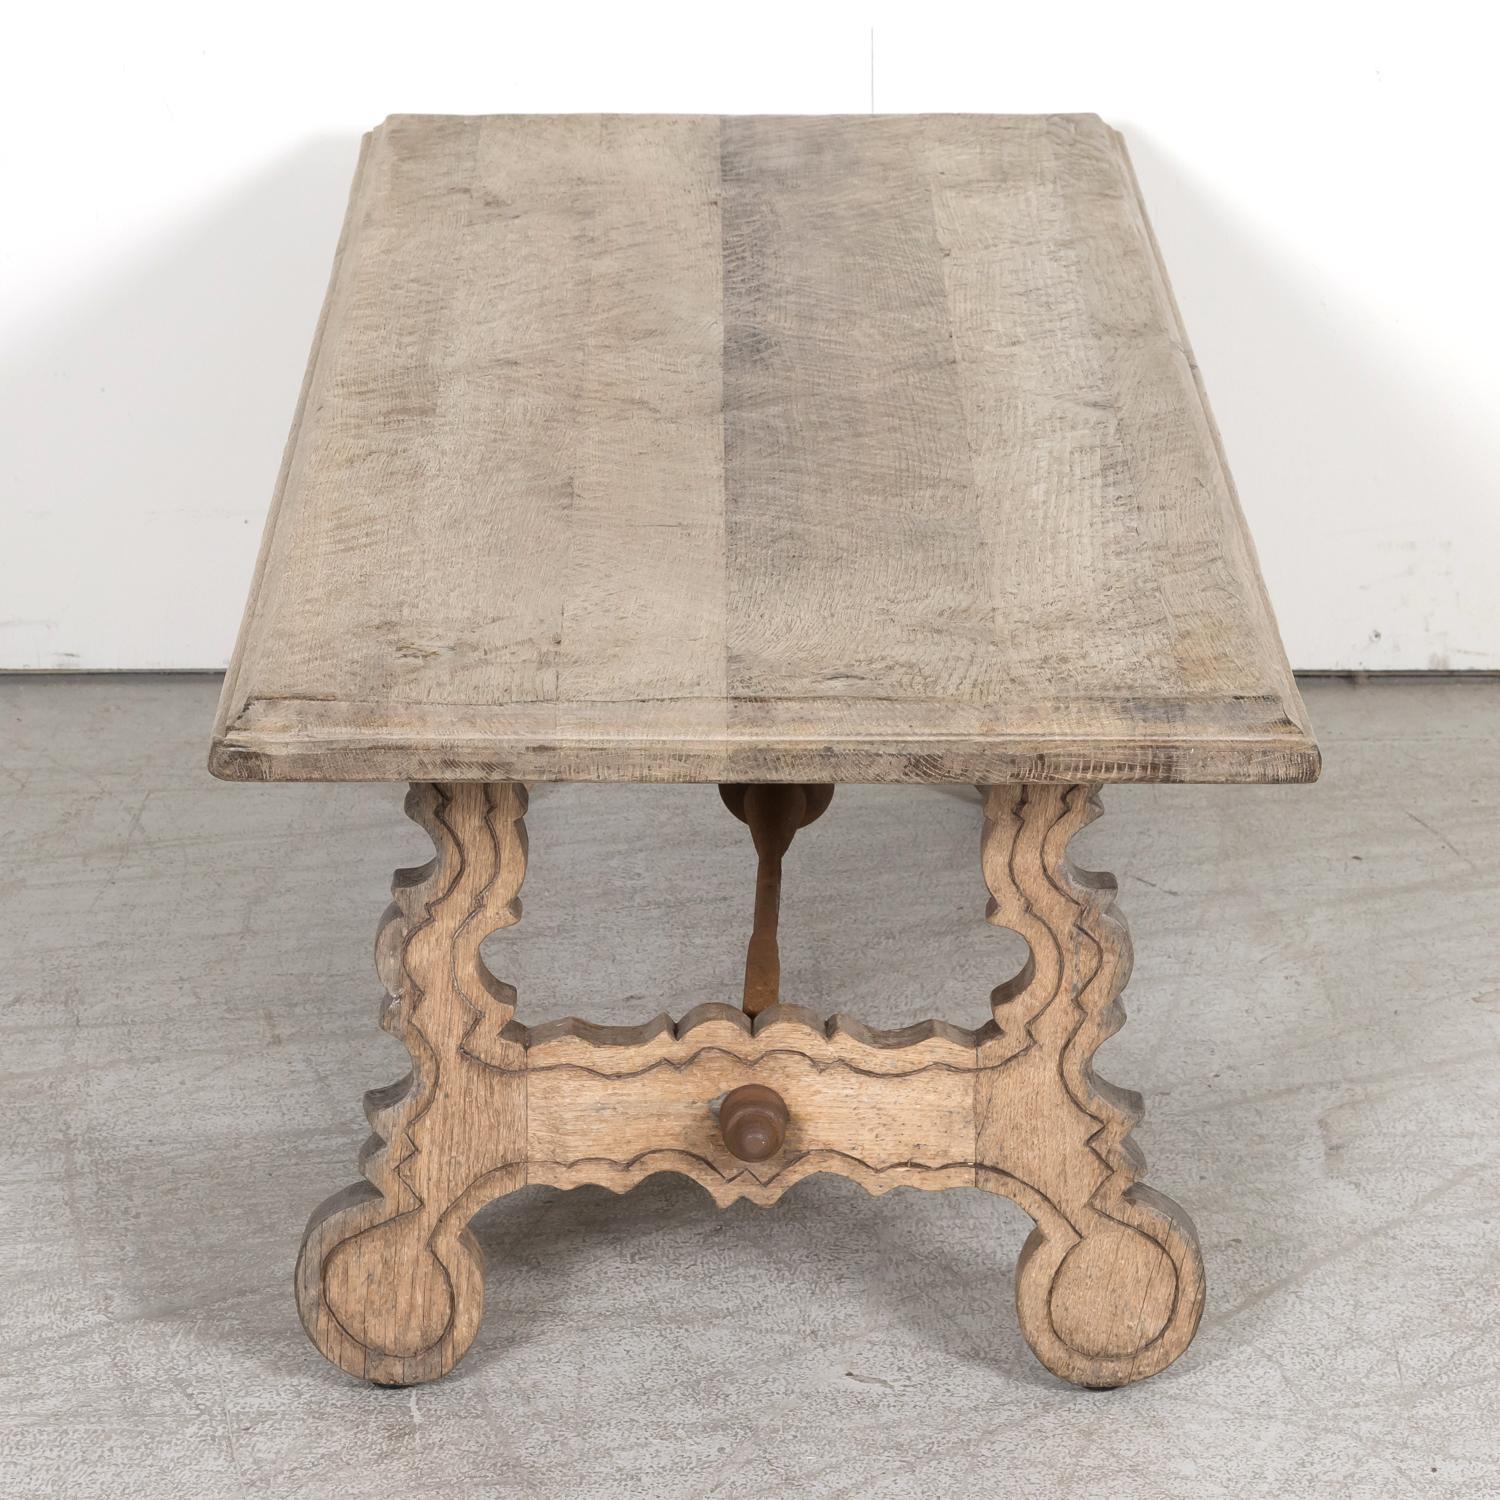 19th Century Spanish Baroque Style Bleached Oak Coffee Table with Iron Stretcher For Sale 10